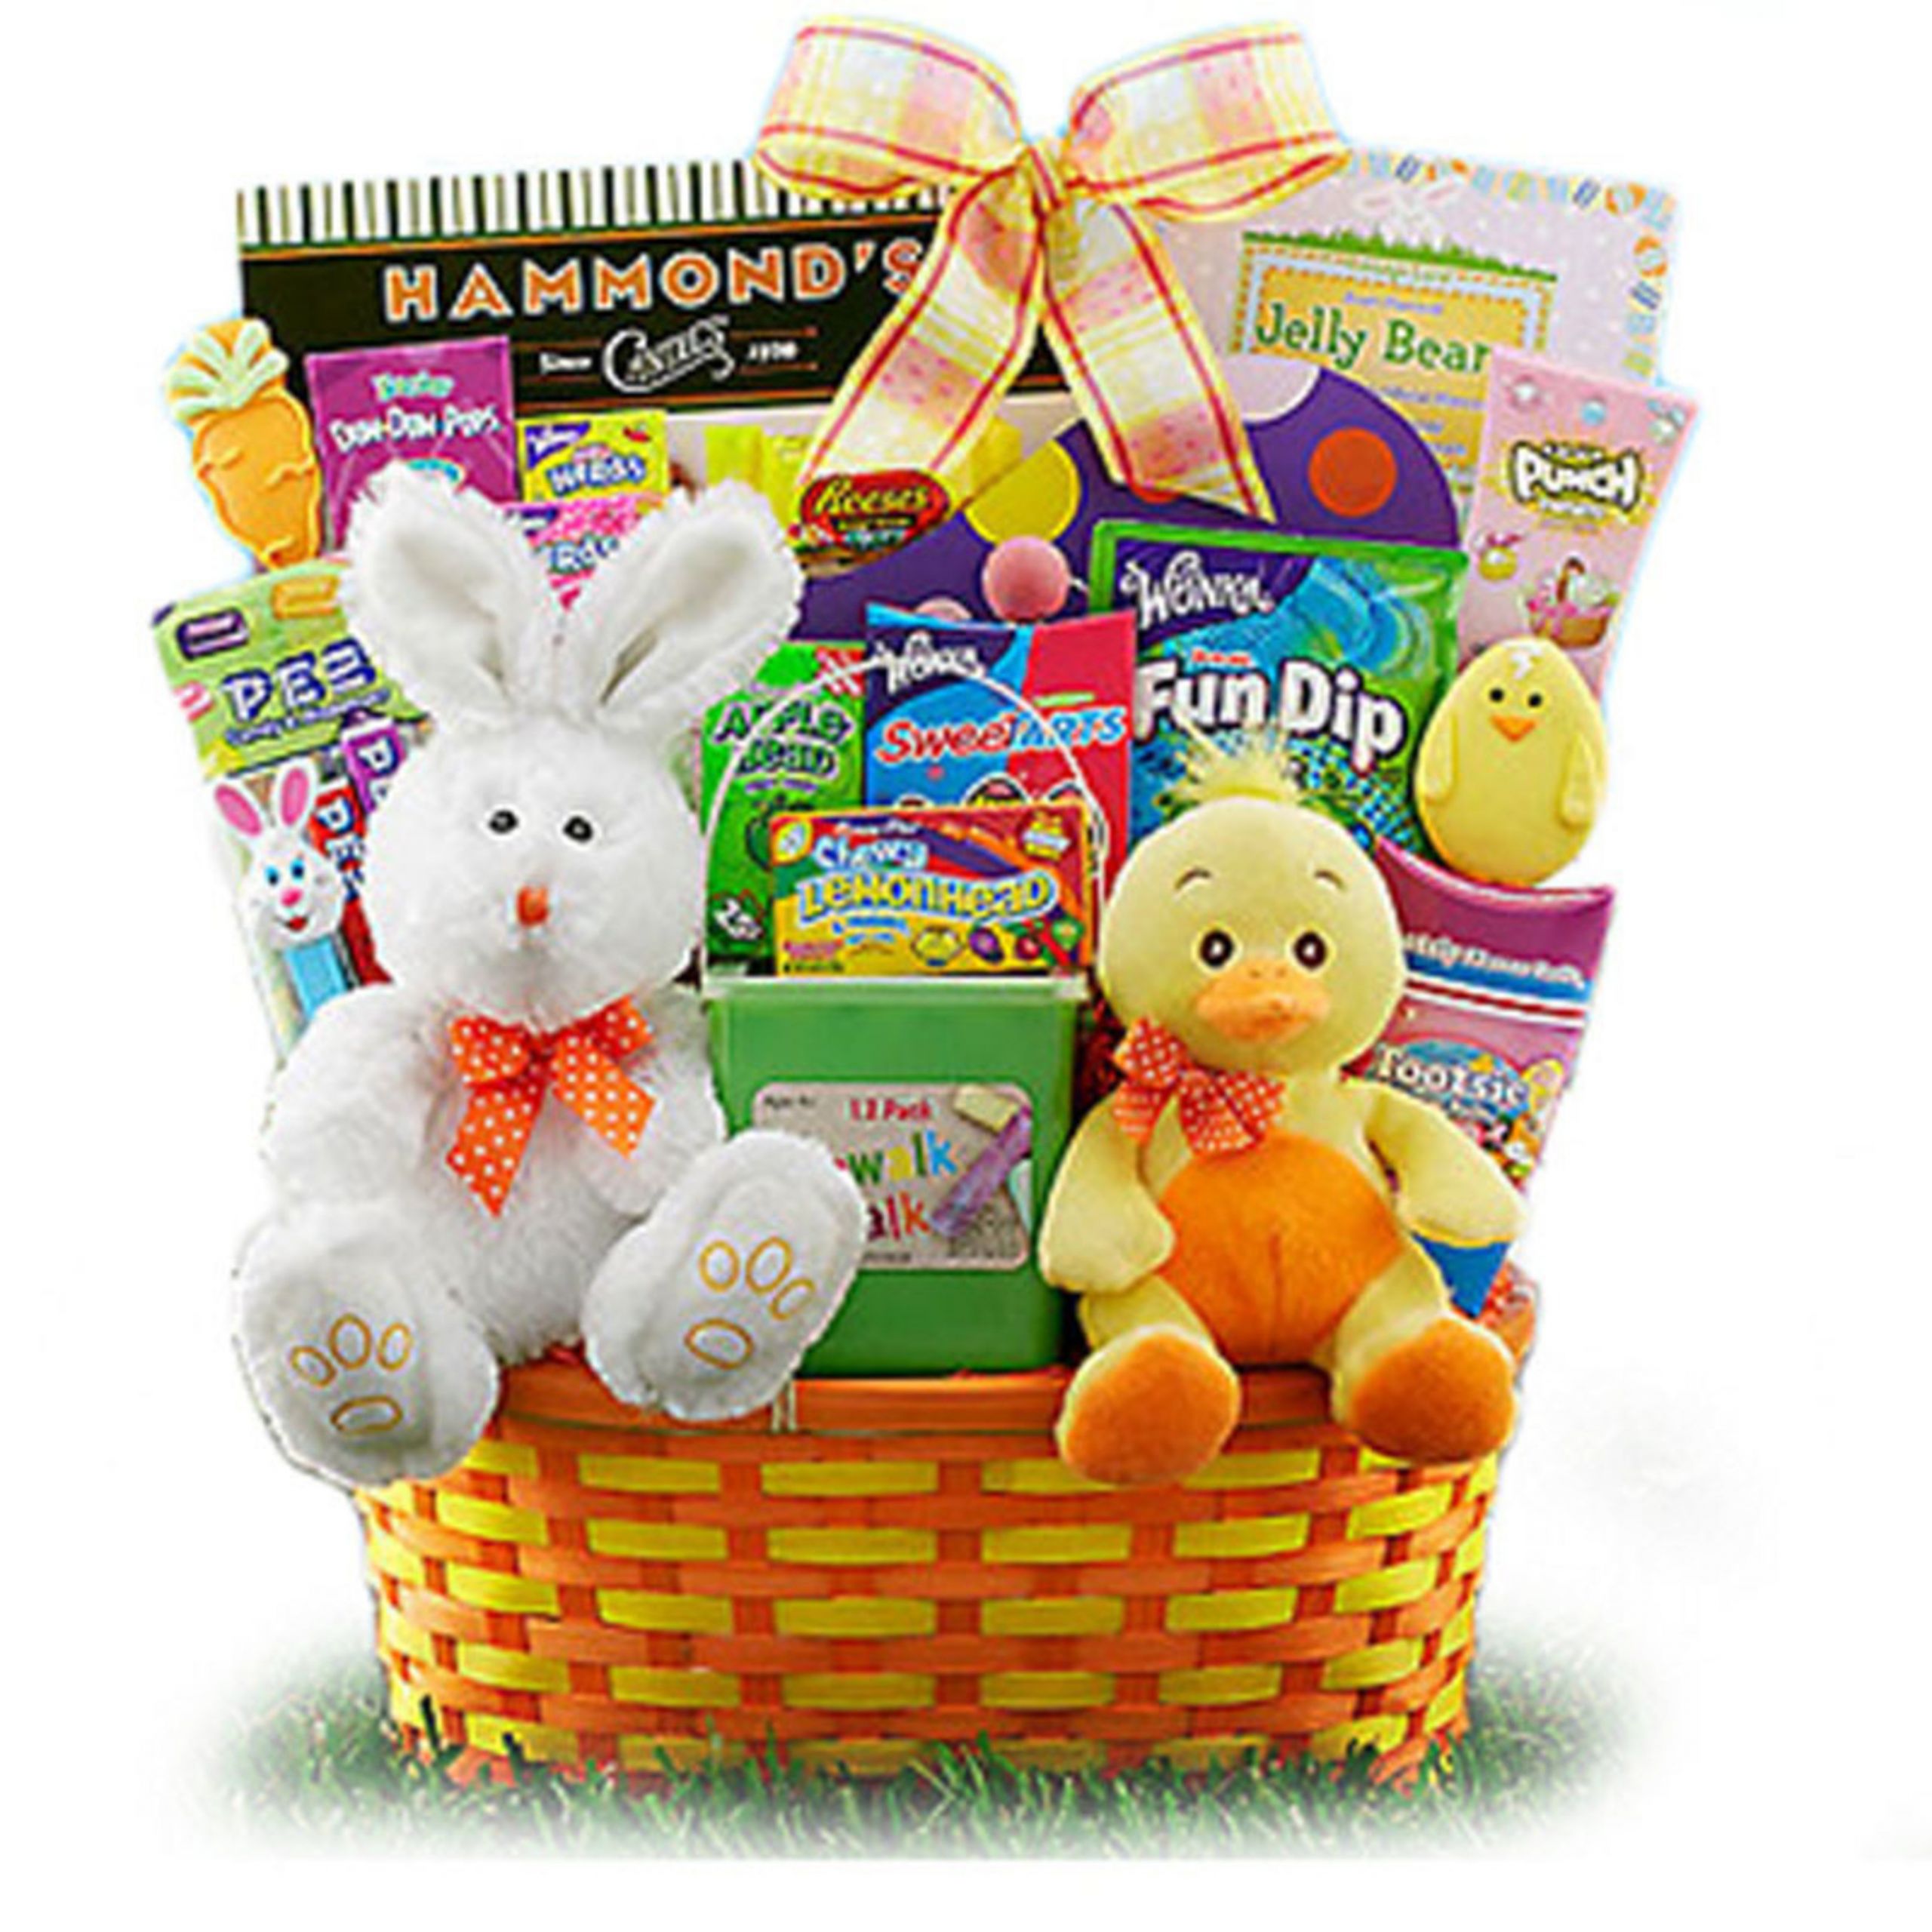 Kid Easter Gifts
 International Gift Delivery pany Hops into Spring with